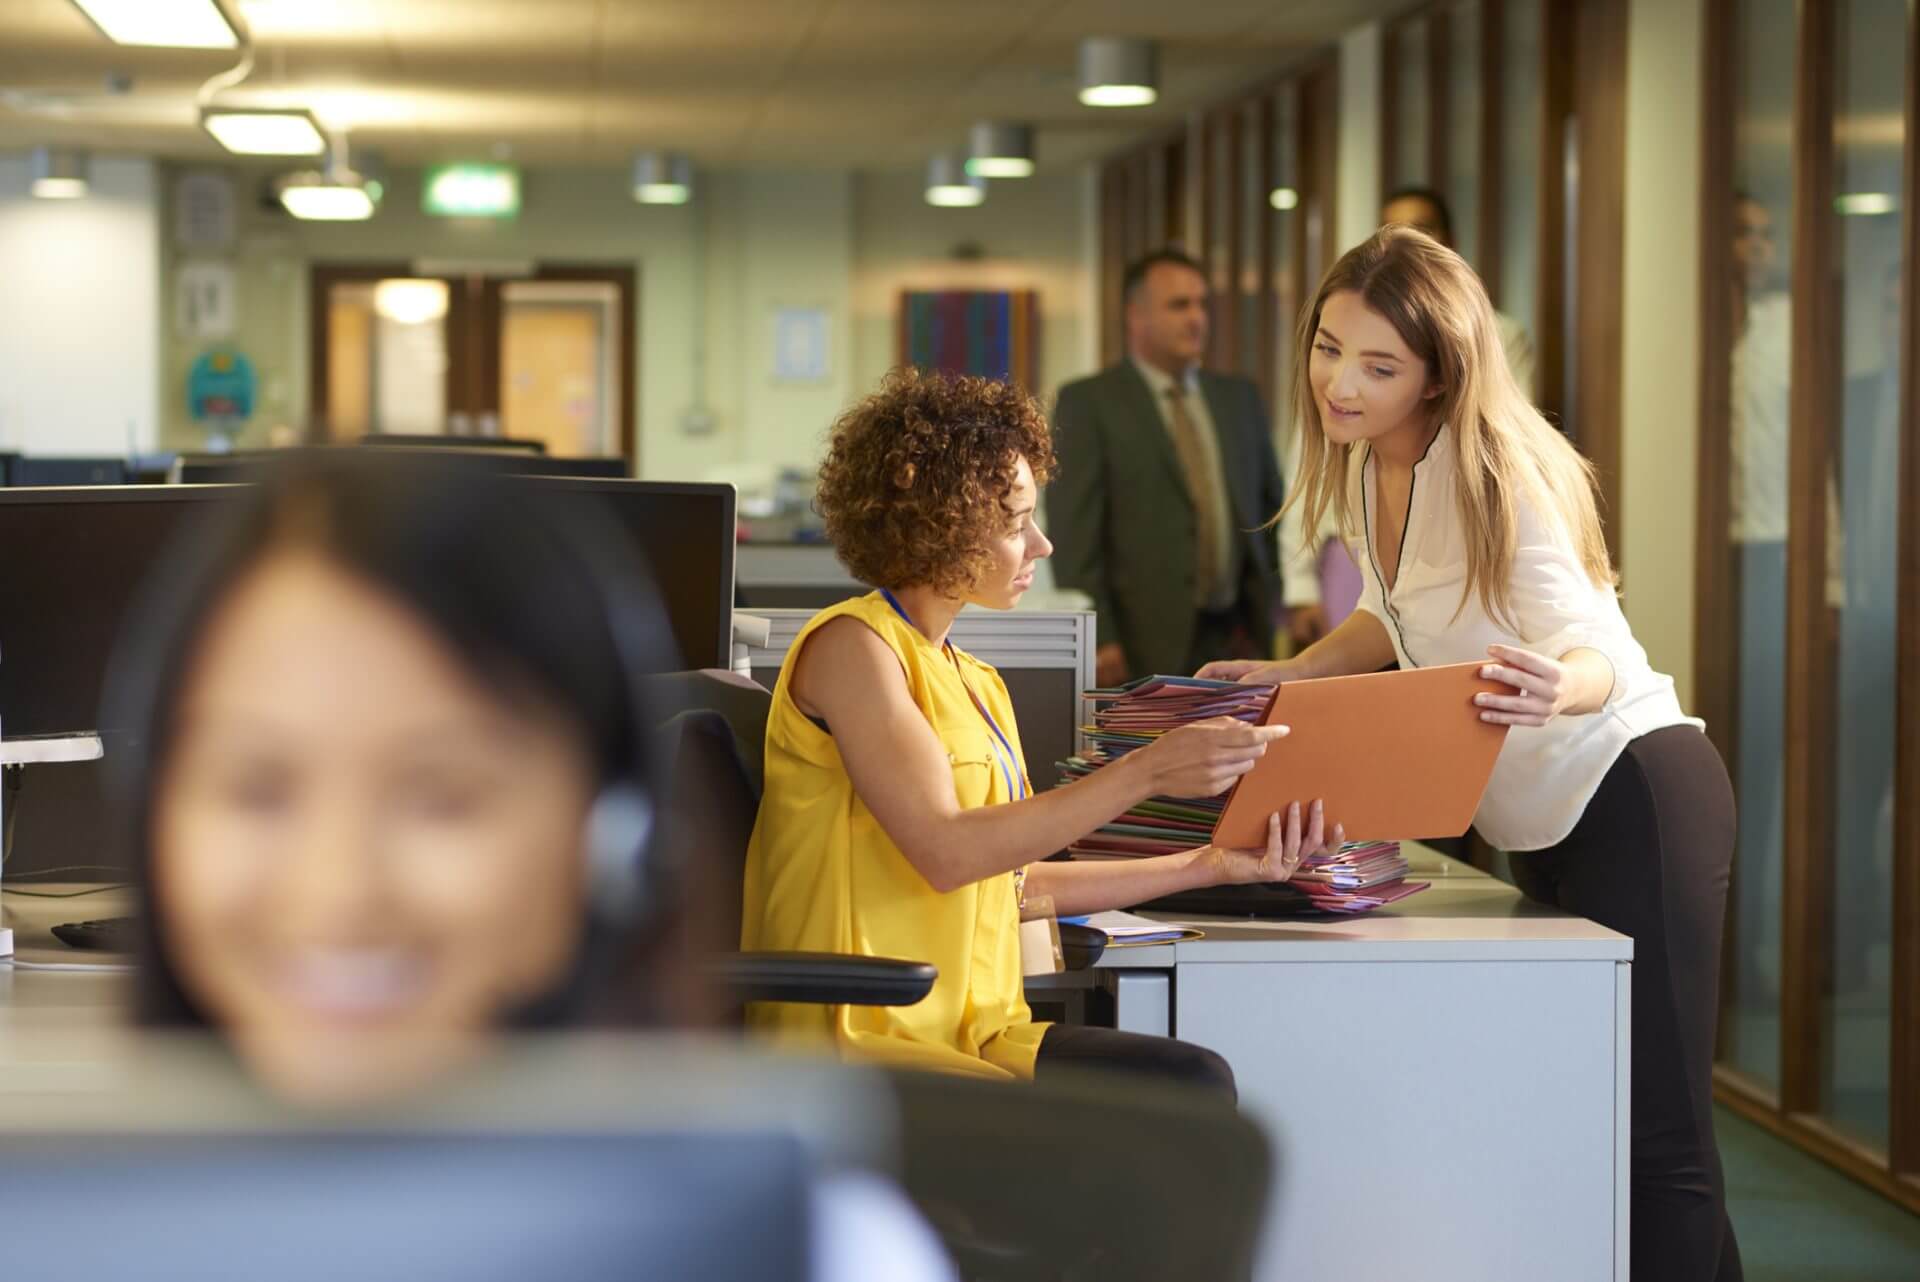 a young office junior takes a file from her supervisor for filing in a large open plan office . Co-workers can be seen defocussed in the foreground and background